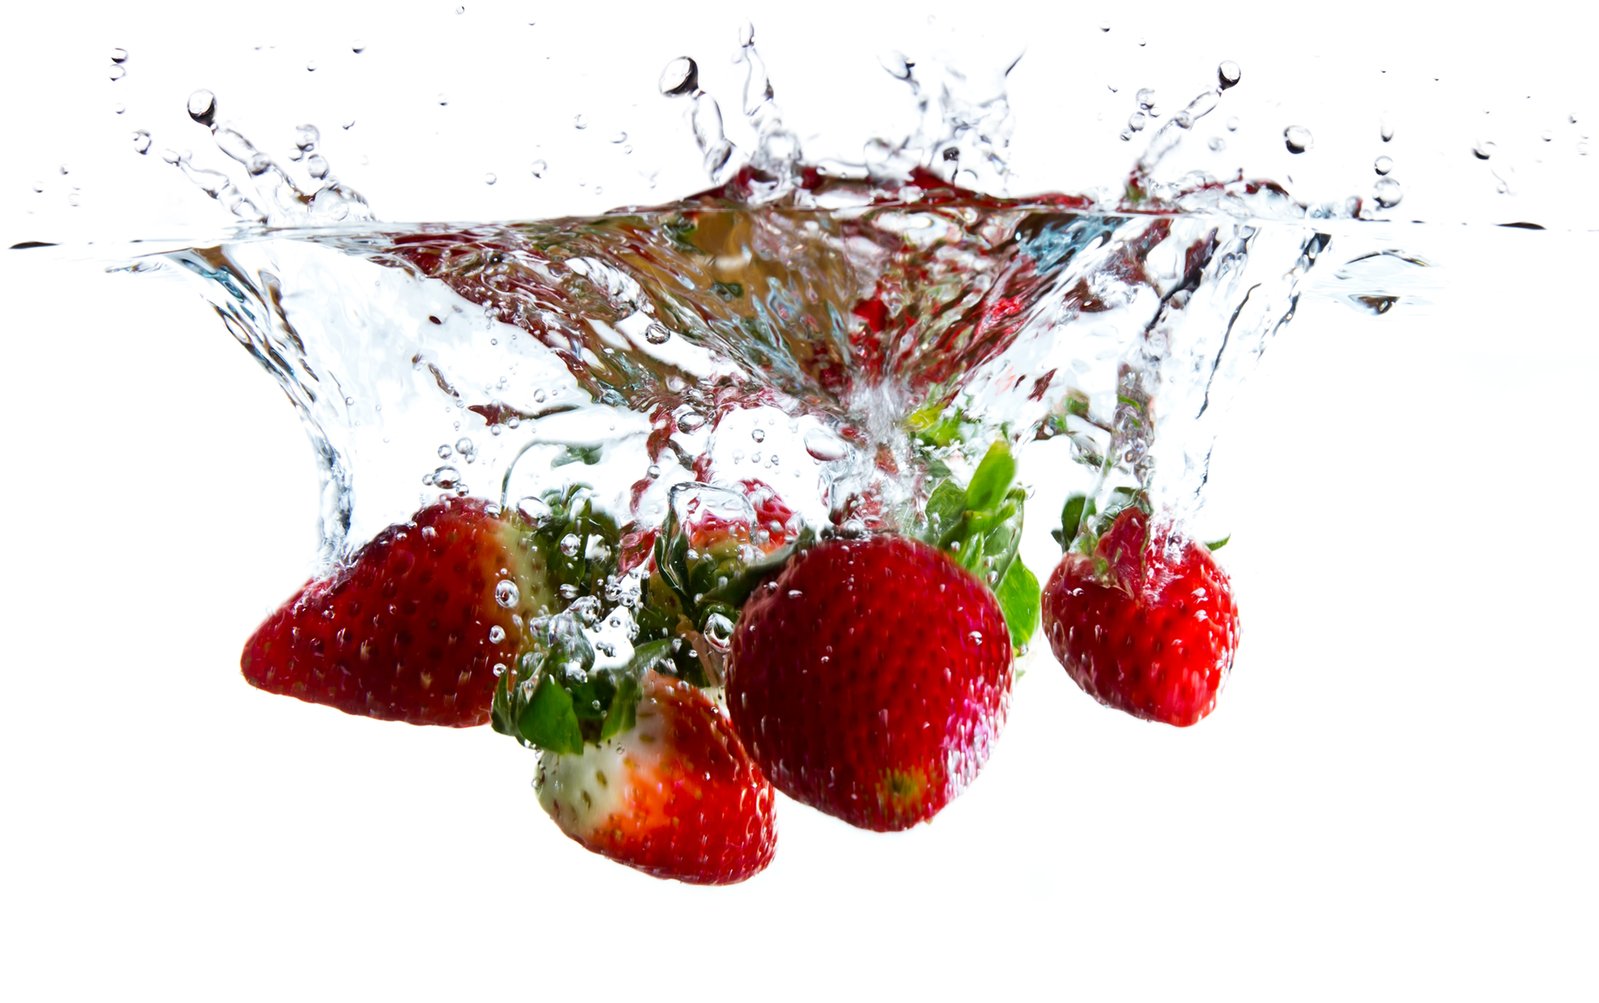 strawberries splashed into water with green leafy stalks